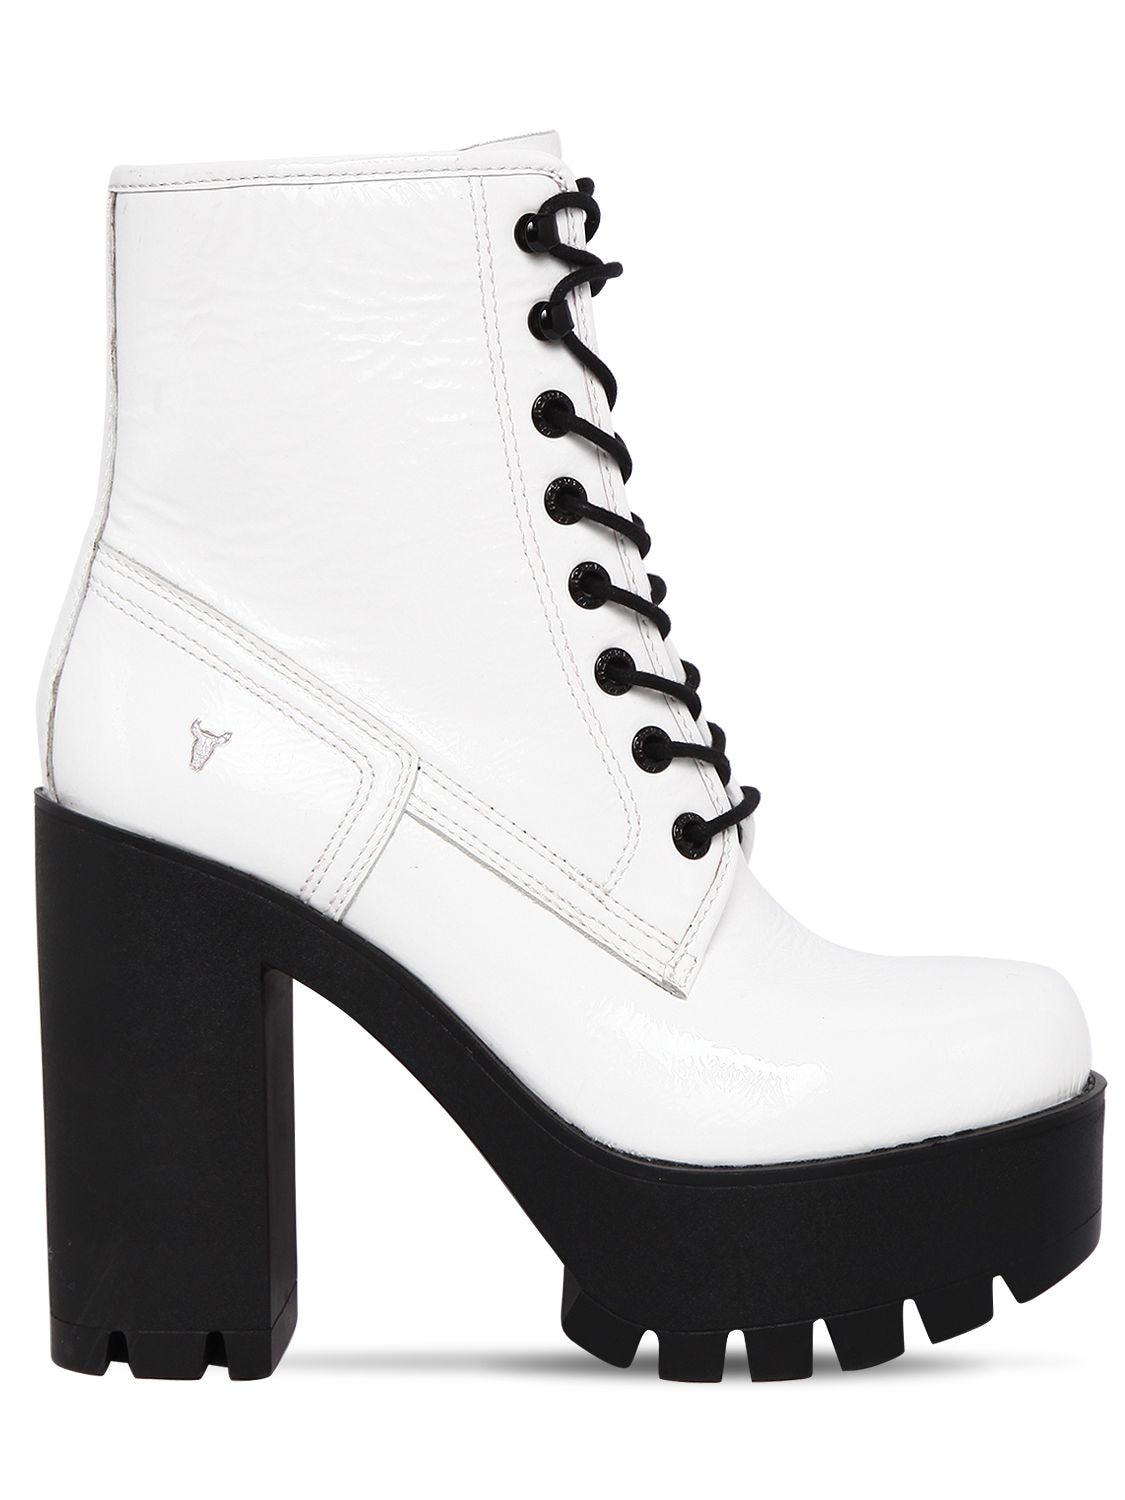 Windsor Smith 120mm Eline Patent Leather Boots In White